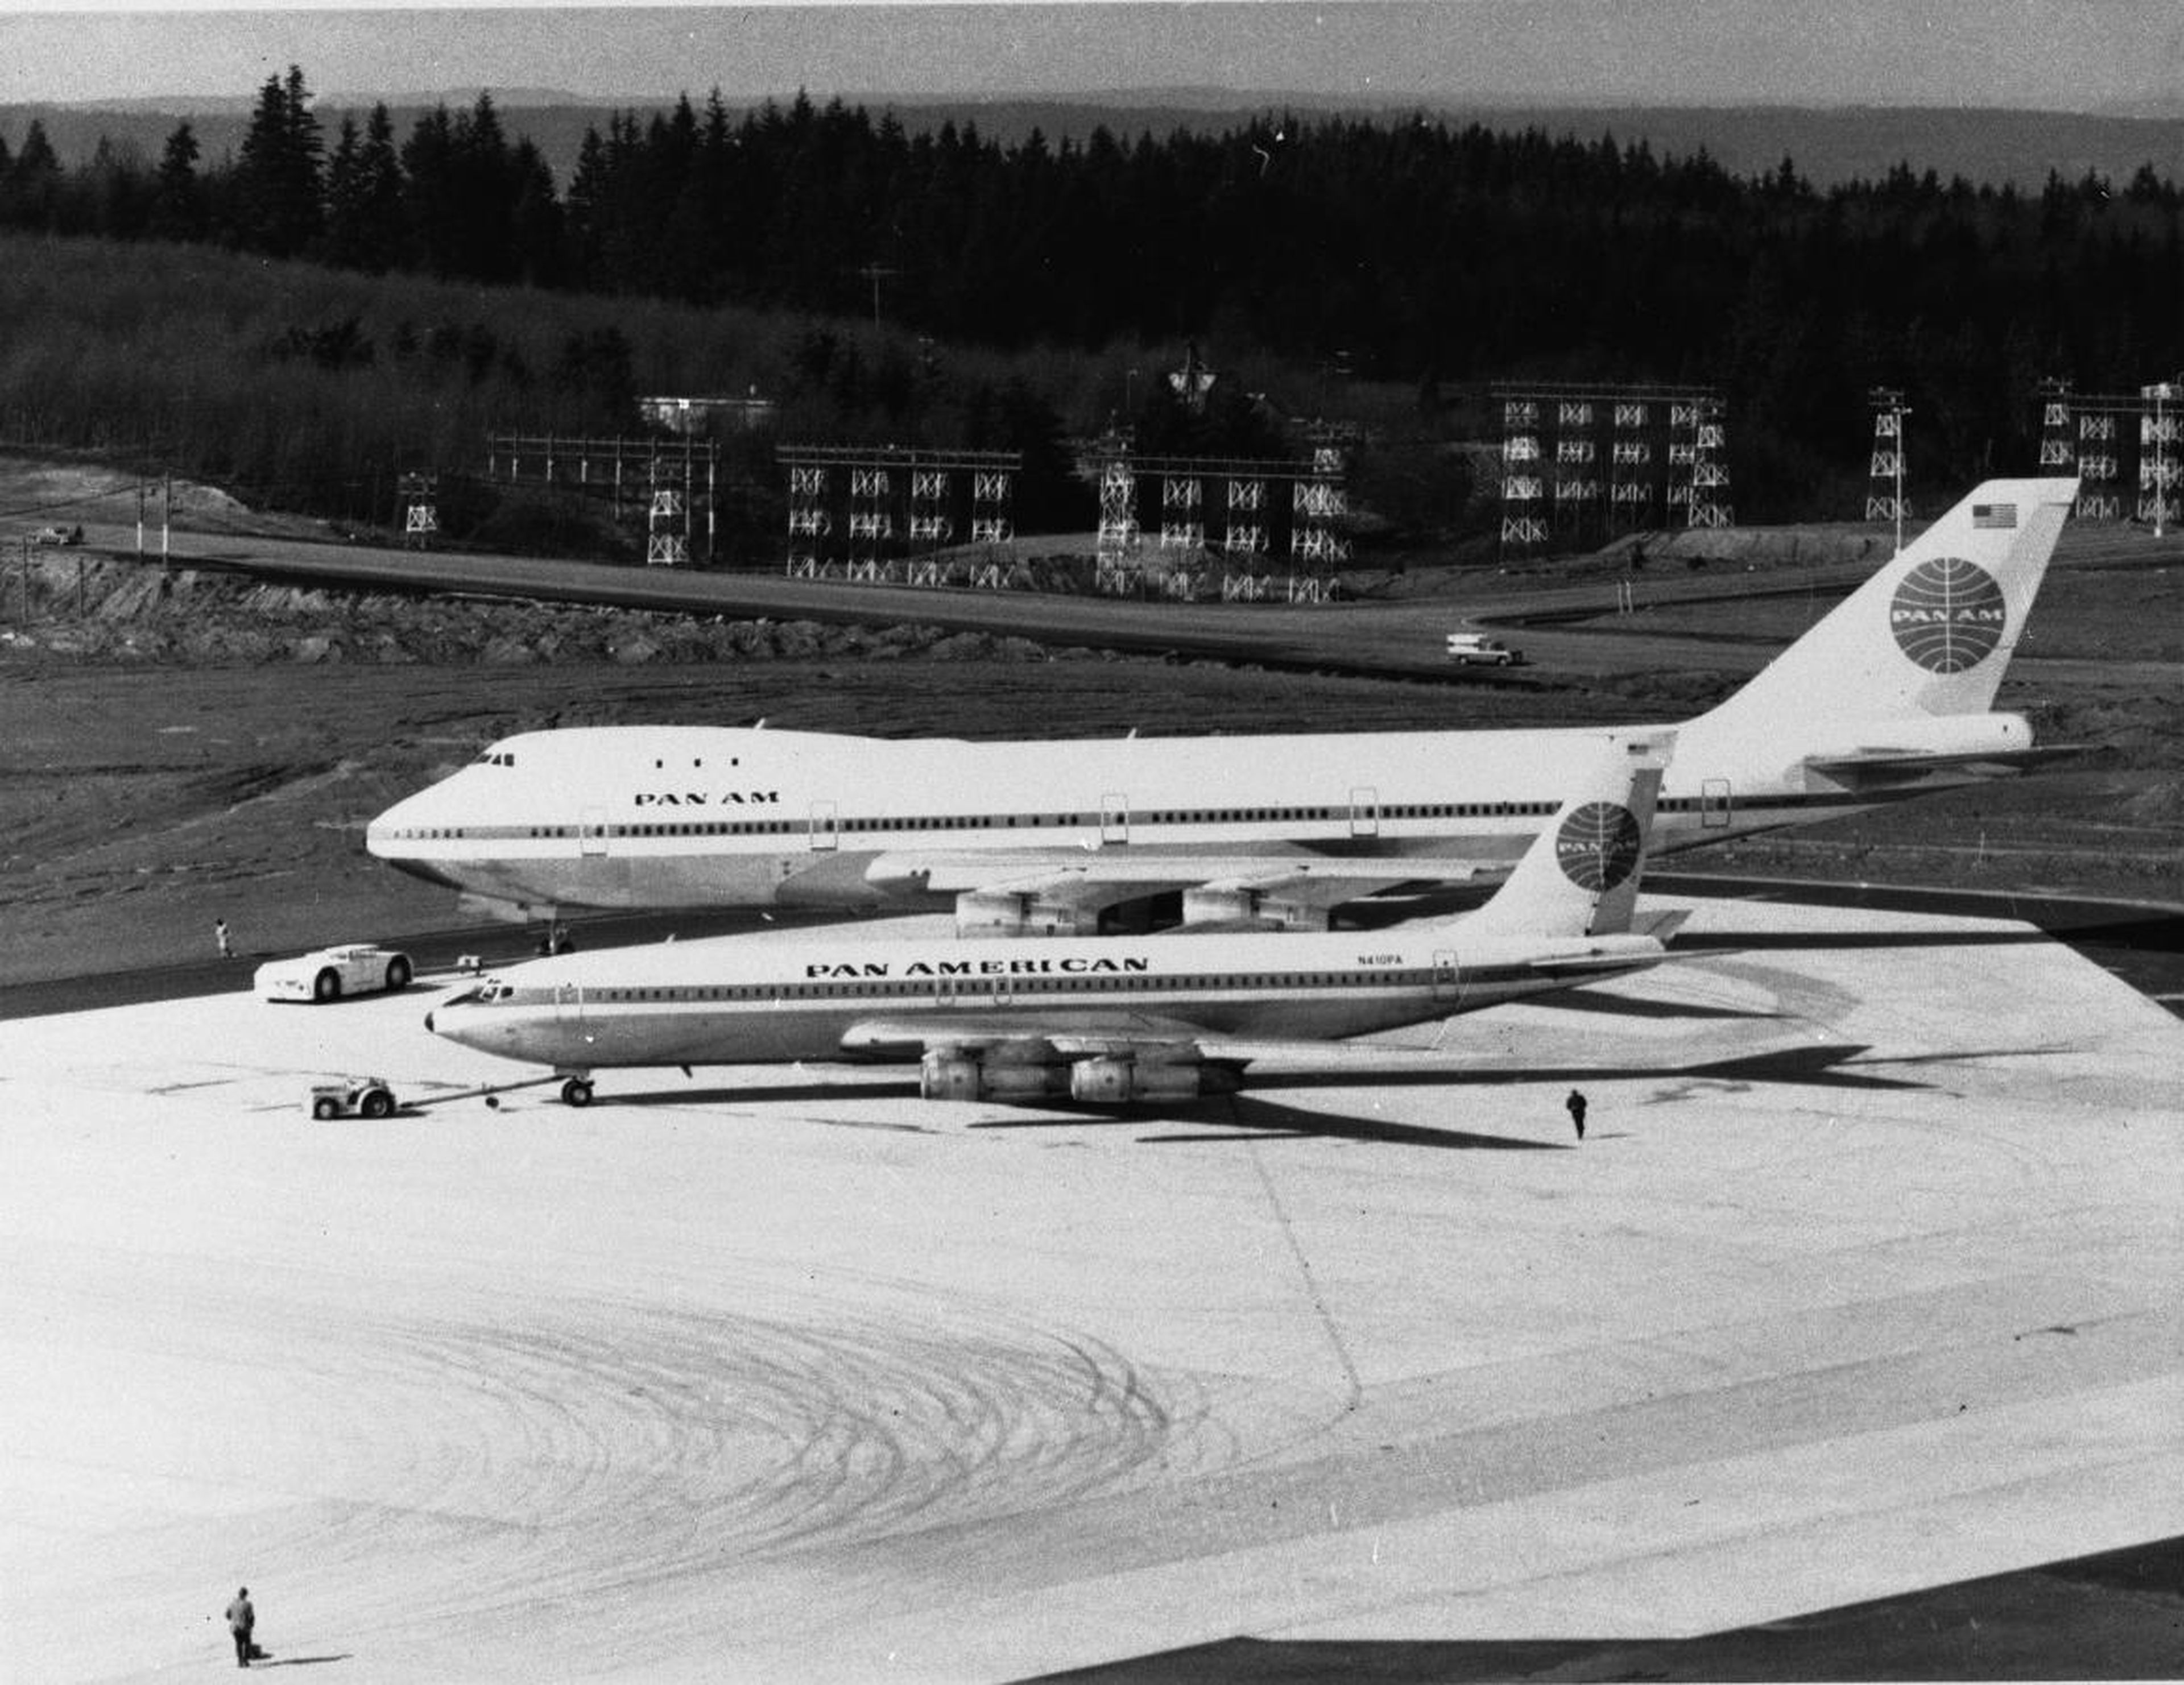 The 747's size, performance, and efficiency helped lower operating costs for airlines enough to make air travel affordable for the masses.